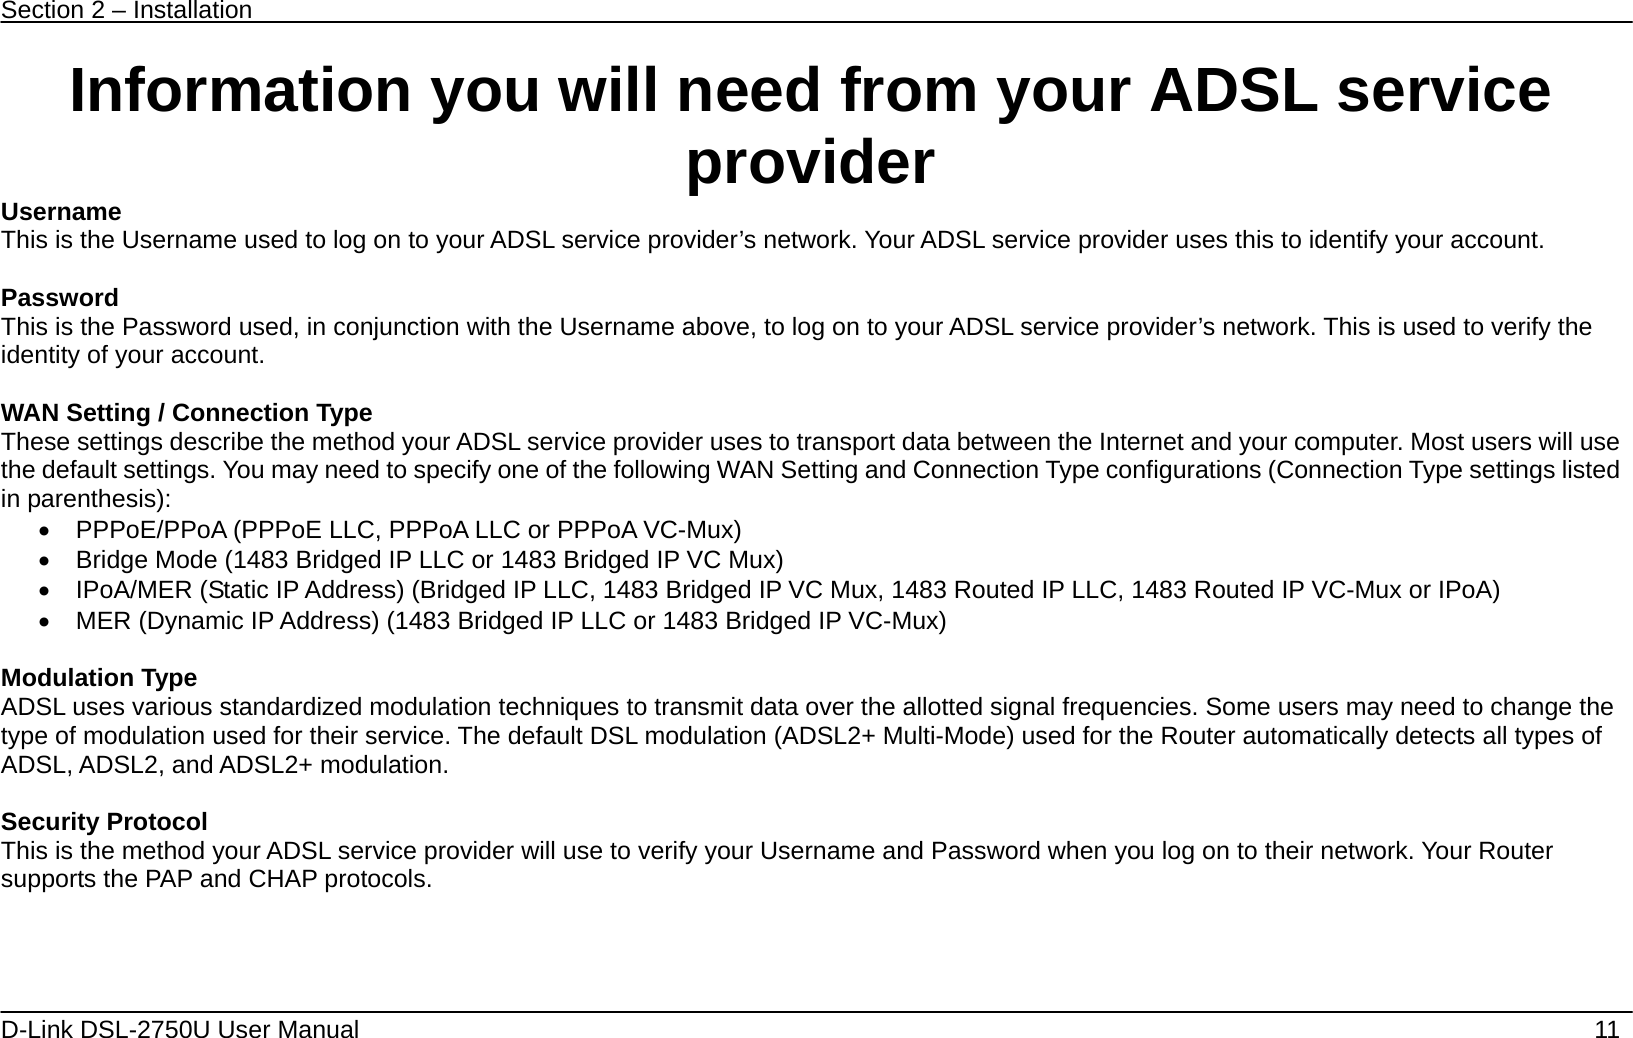 Section 2 – Installation   D-Link DSL-2750U User Manual    11 Information you will need from your ADSL service provider Username This is the Username used to log on to your ADSL service provider’s network. Your ADSL service provider uses this to identify your account.  Password This is the Password used, in conjunction with the Username above, to log on to your ADSL service provider’s network. This is used to verify the identity of your account.  WAN Setting / Connection Type These settings describe the method your ADSL service provider uses to transport data between the Internet and your computer. Most users will use the default settings. You may need to specify one of the following WAN Setting and Connection Type configurations (Connection Type settings listed in parenthesis):     PPPoE/PPoA (PPPoE LLC, PPPoA LLC or PPPoA VC-Mux)   Bridge Mode (1483 Bridged IP LLC or 1483 Bridged IP VC Mux)   IPoA/MER (Static IP Address) (Bridged IP LLC, 1483 Bridged IP VC Mux, 1483 Routed IP LLC, 1483 Routed IP VC-Mux or IPoA)   MER (Dynamic IP Address) (1483 Bridged IP LLC or 1483 Bridged IP VC-Mux)      Modulation Type ADSL uses various standardized modulation techniques to transmit data over the allotted signal frequencies. Some users may need to change the type of modulation used for their service. The default DSL modulation (ADSL2+ Multi-Mode) used for the Router automatically detects all types of ADSL, ADSL2, and ADSL2+ modulation.  Security Protocol This is the method your ADSL service provider will use to verify your Username and Password when you log on to their network. Your Router supports the PAP and CHAP protocols.     